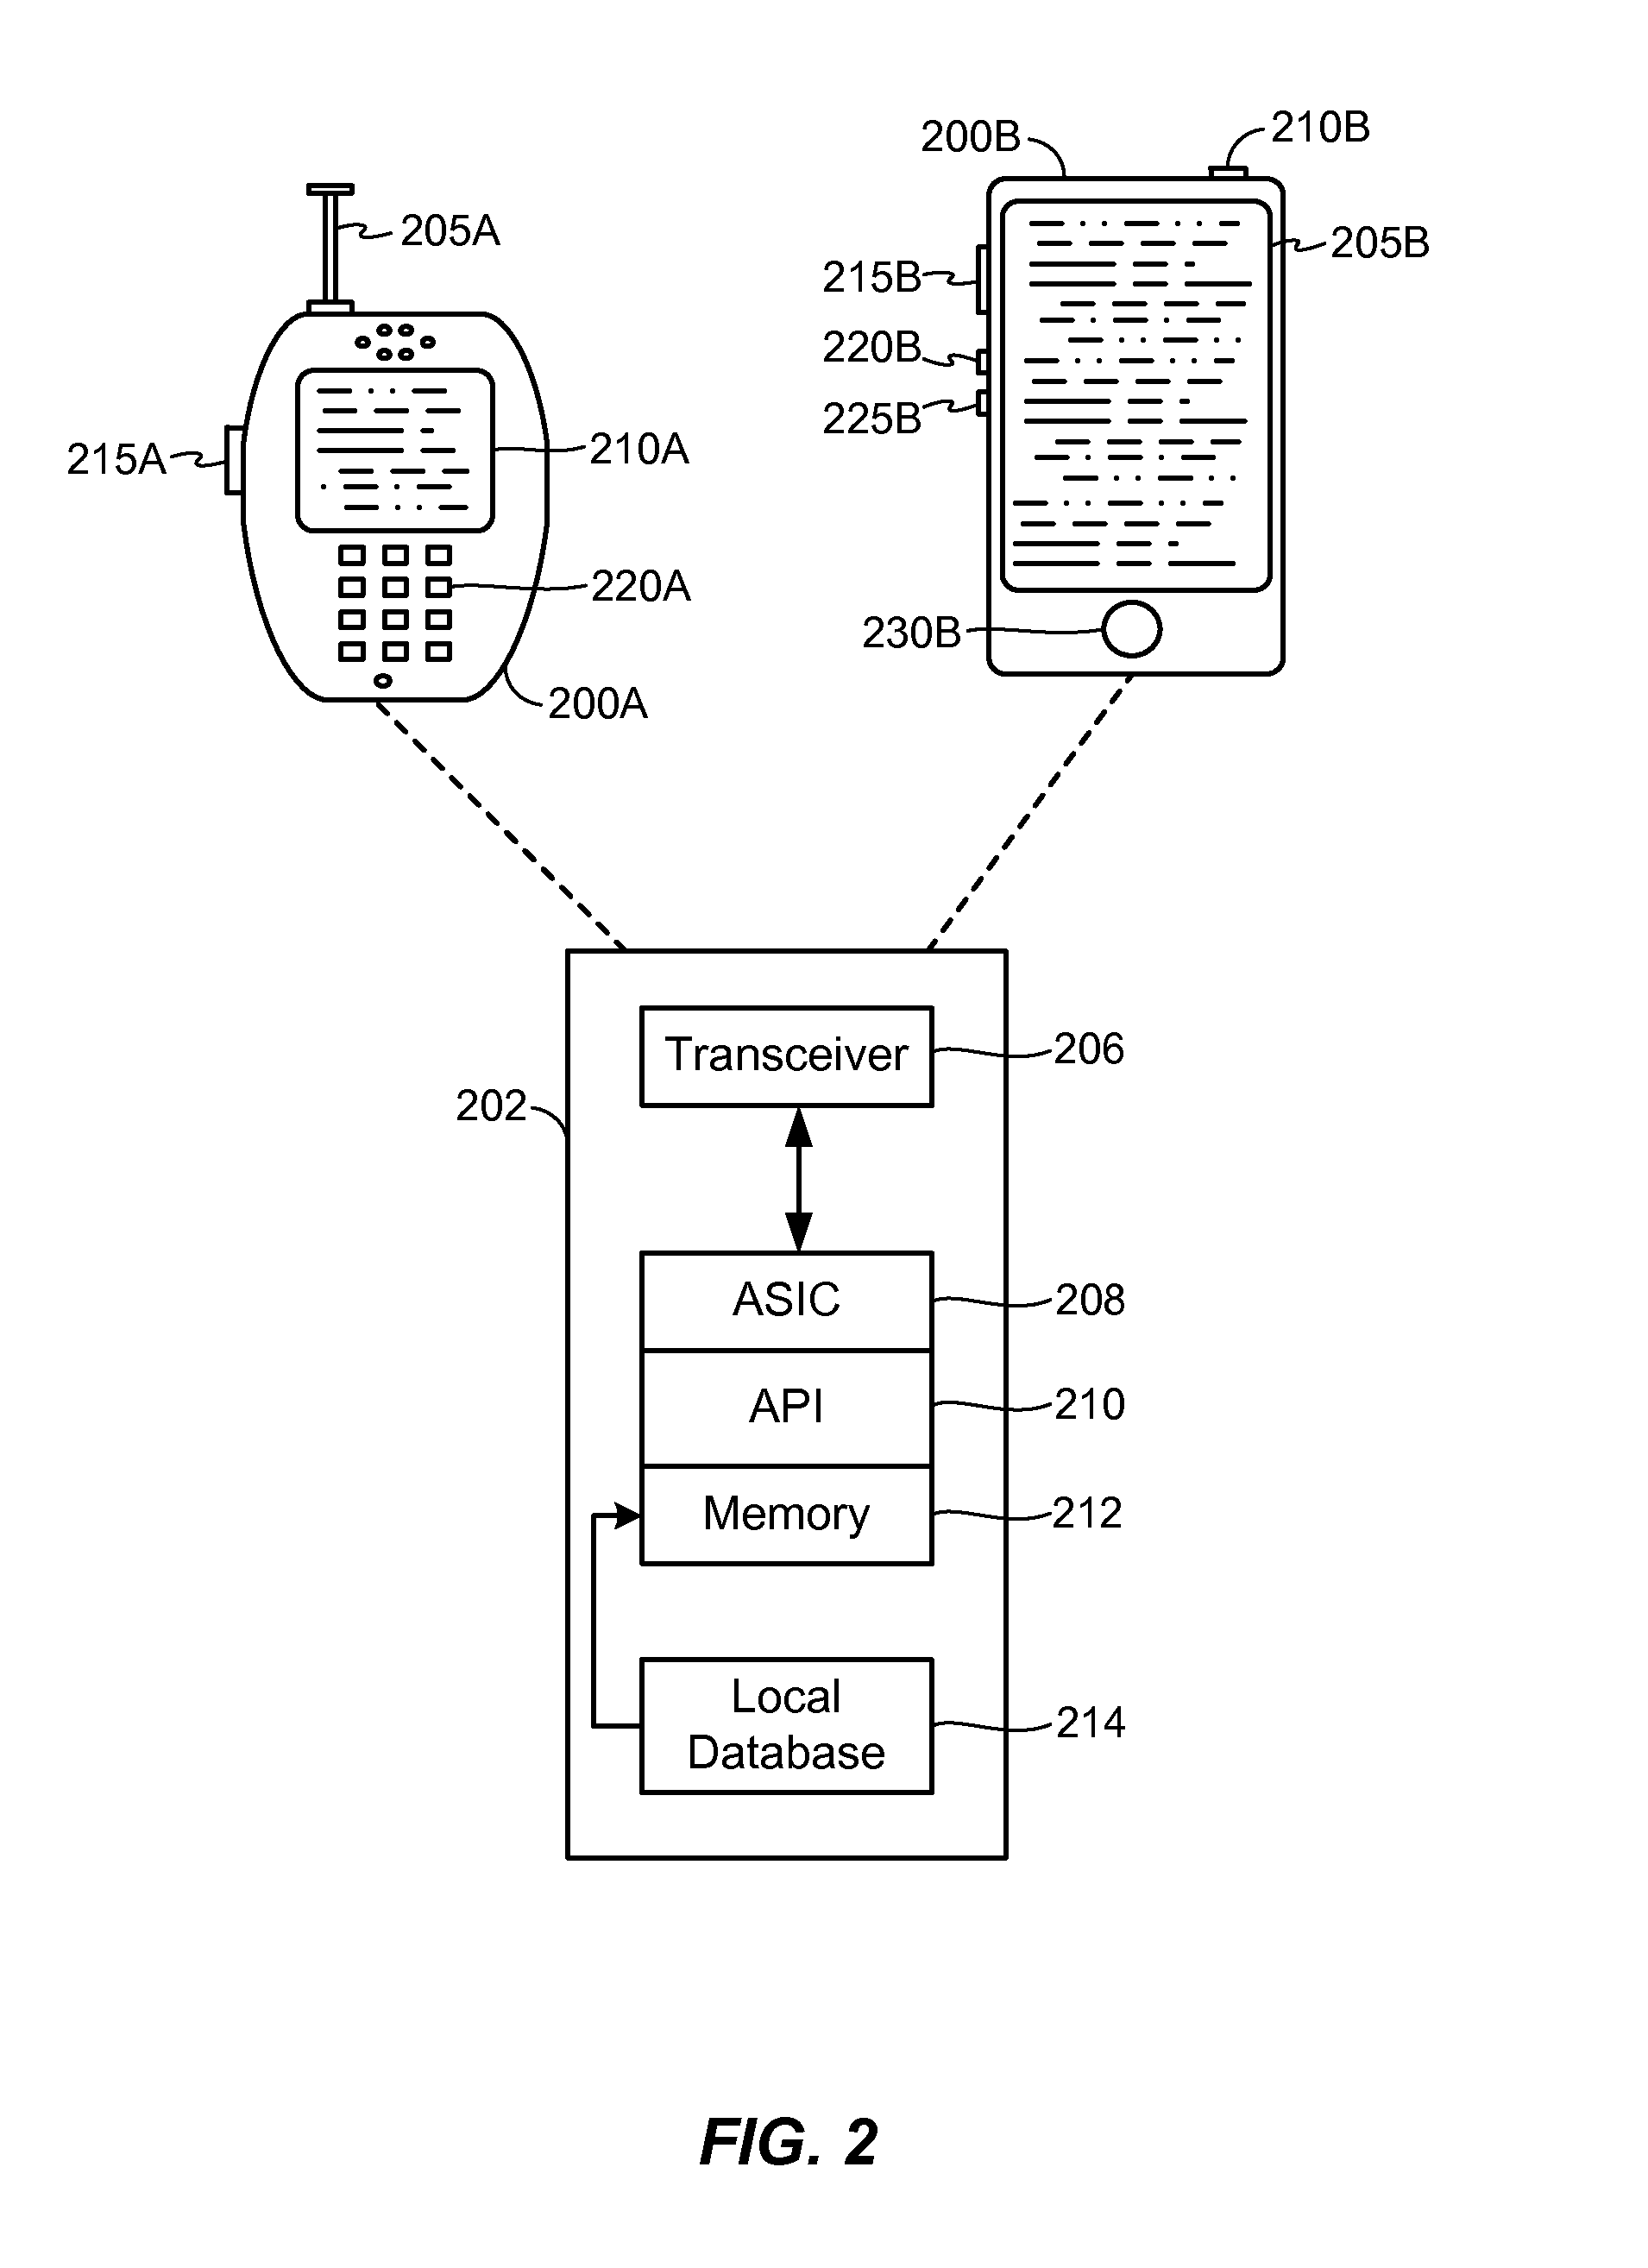 Coordinating a display function between a plurality of proximate client devices